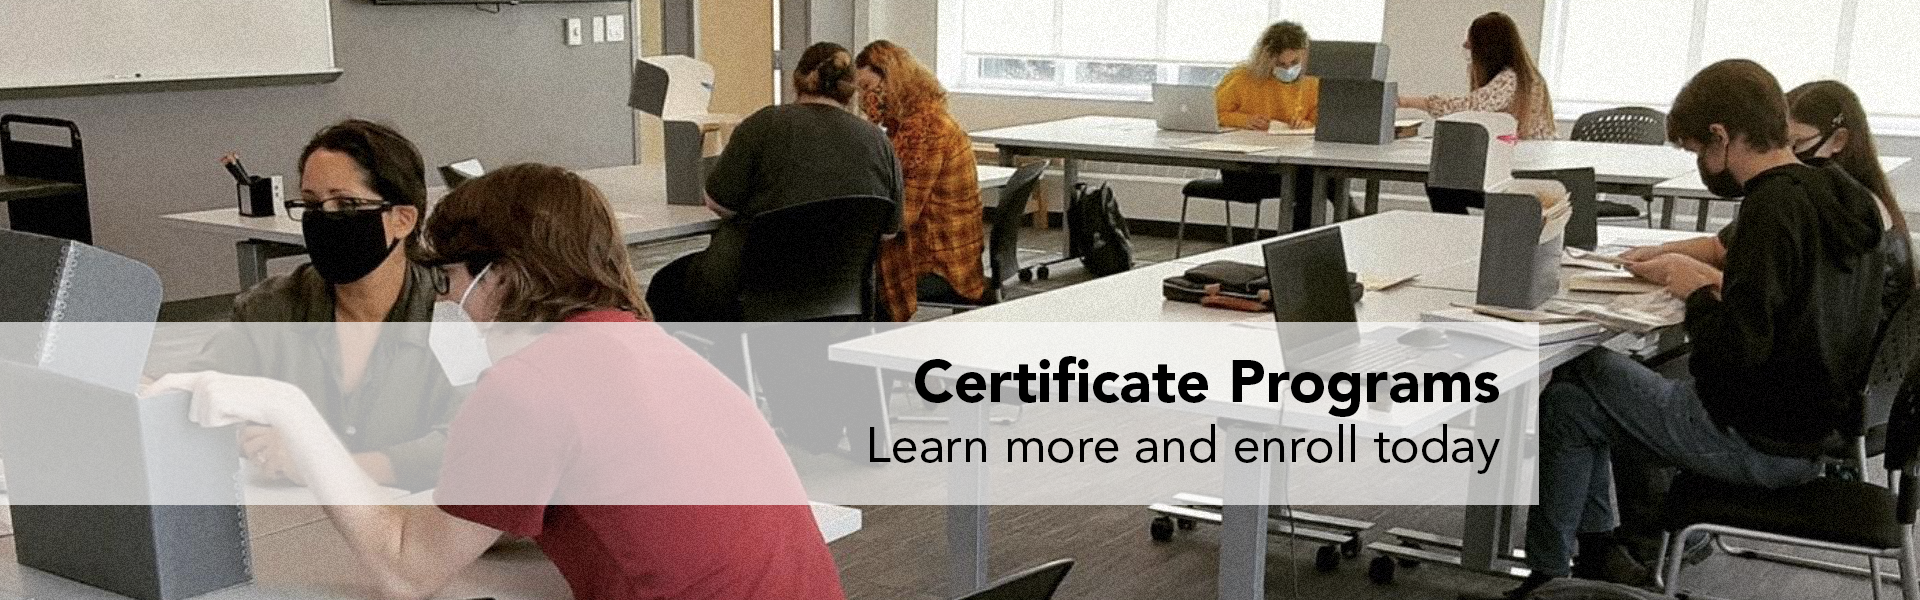 Certificate Programs - Learn more and enroll today